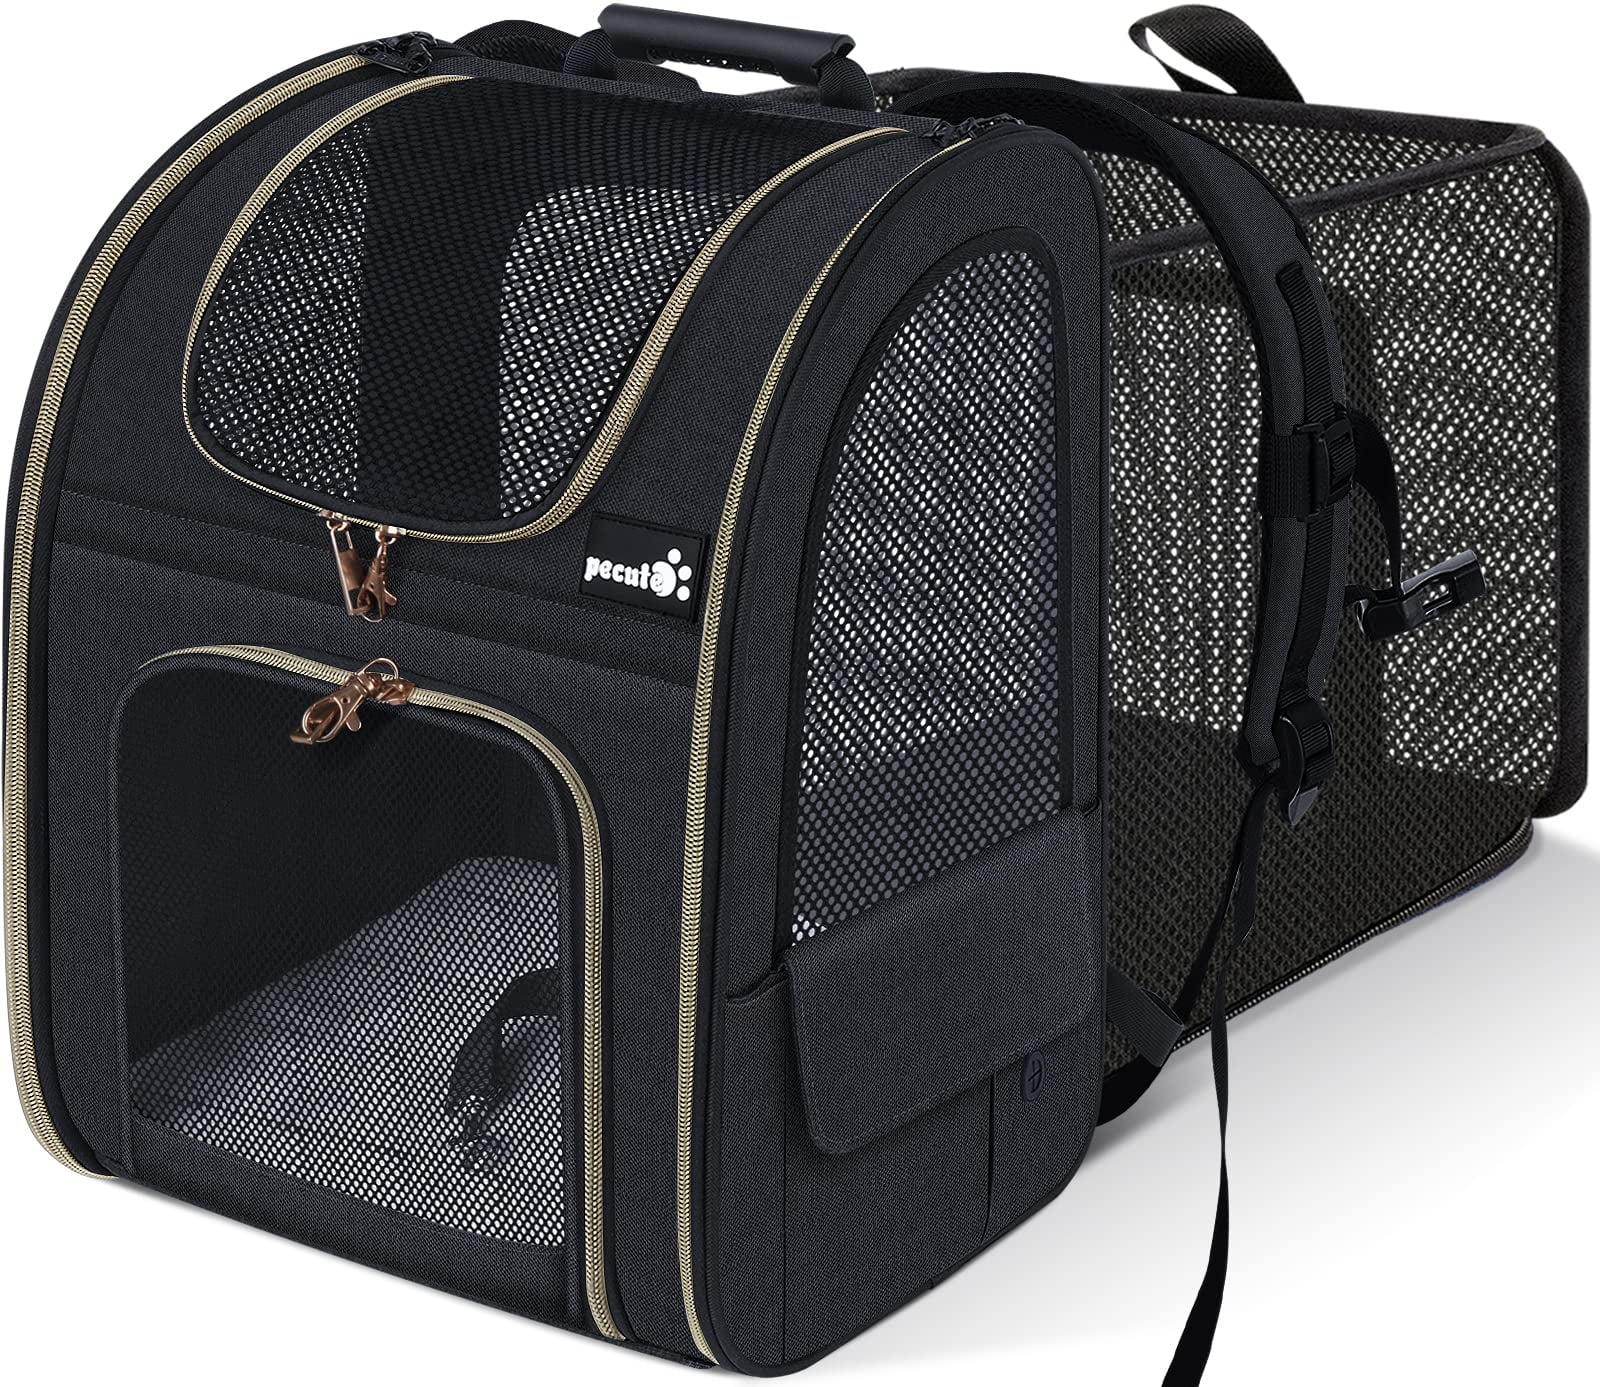 Petsfit Cat Carrier Expandable Dog Carrier for Medium Dogs, Expandable Pet Carrier Most Airline Approved, Two Side Expasion, Easy Carry on Luggage